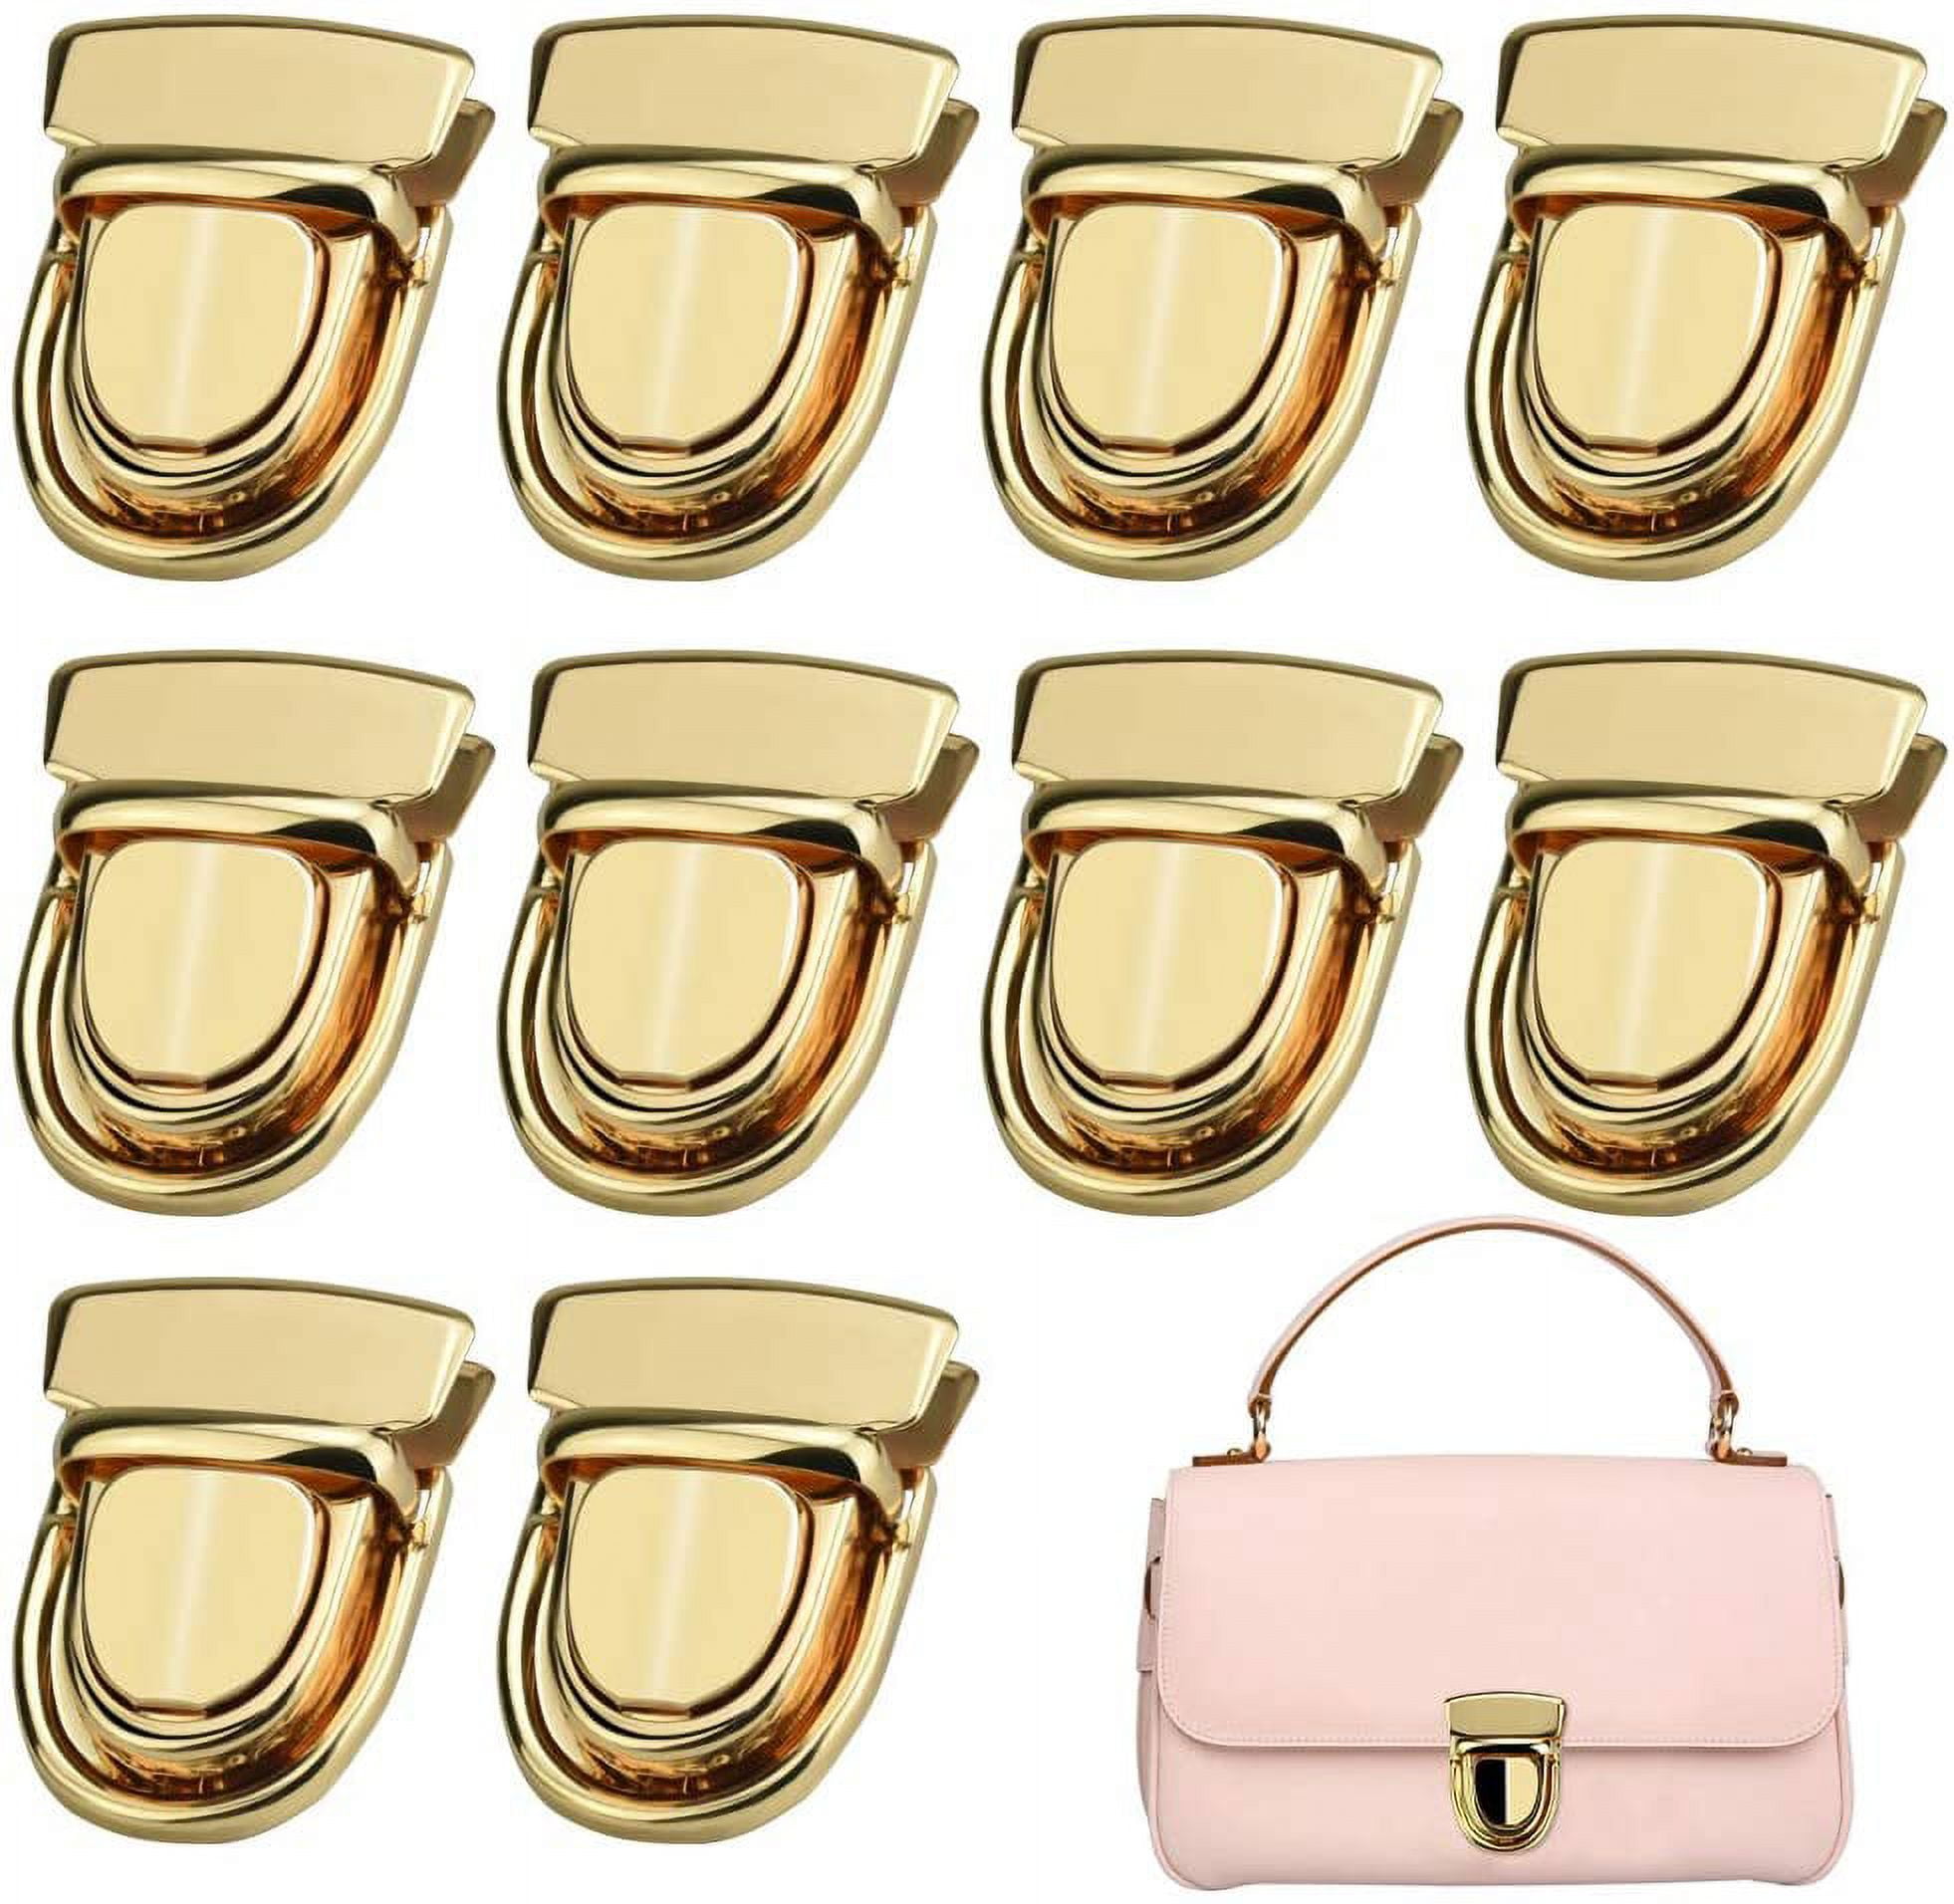  SEWACC 6 Pcs Lock Bag Accessories Bag Hardware Tote Purse Bag  Clasp Buckle Hardware Clasp Bag Close Fasteners Metal Buckles for Bag DIY  Craft Firmware Metal Button to Rotate